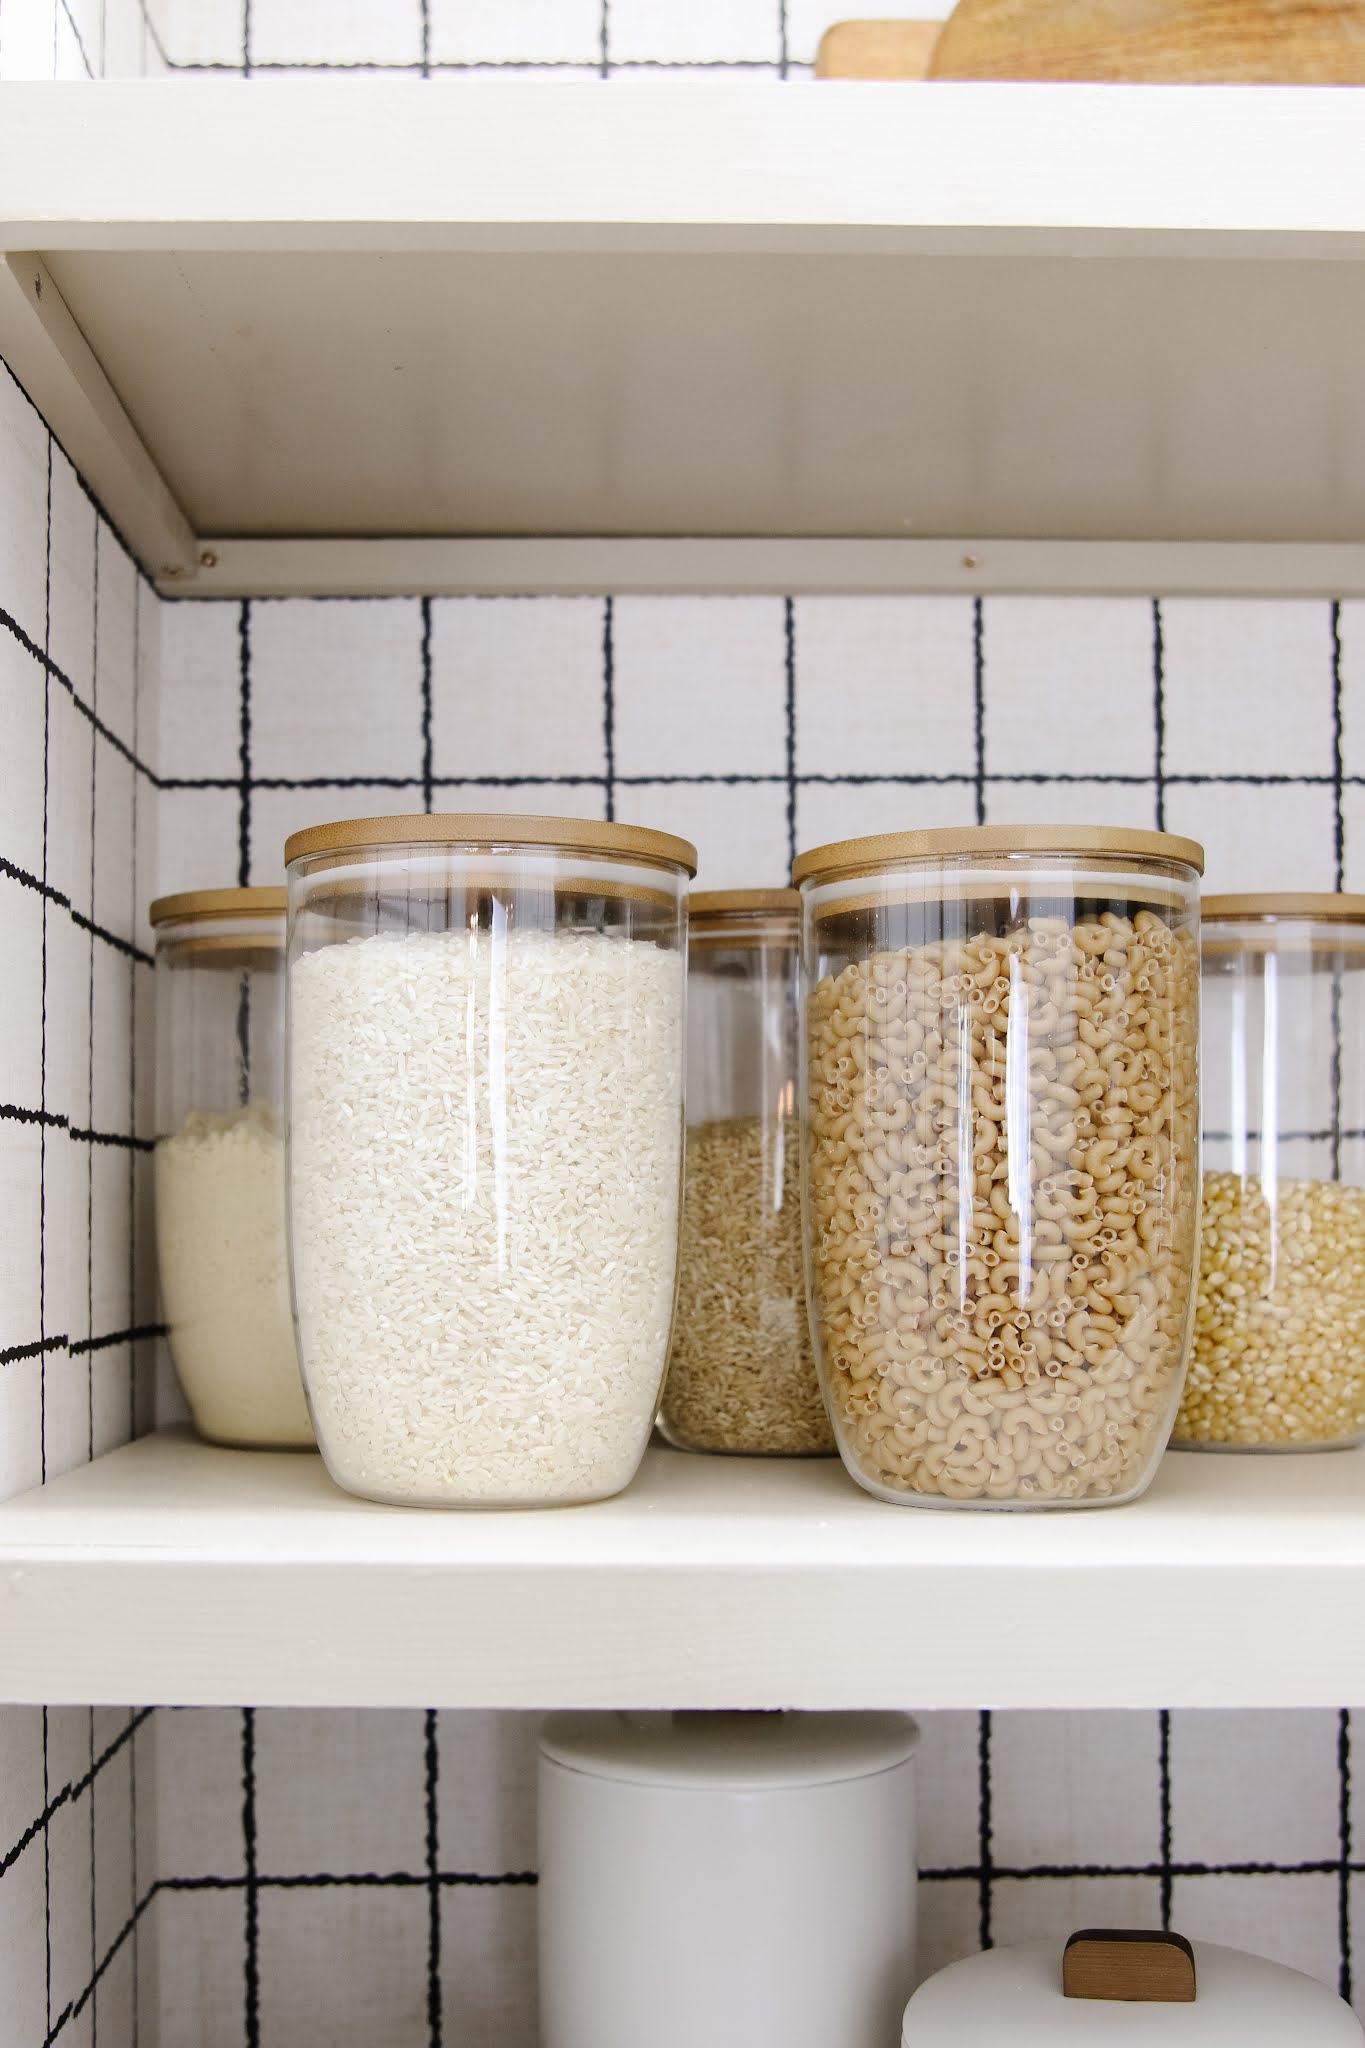 Pantry Organization Containers - Tastes Lovely